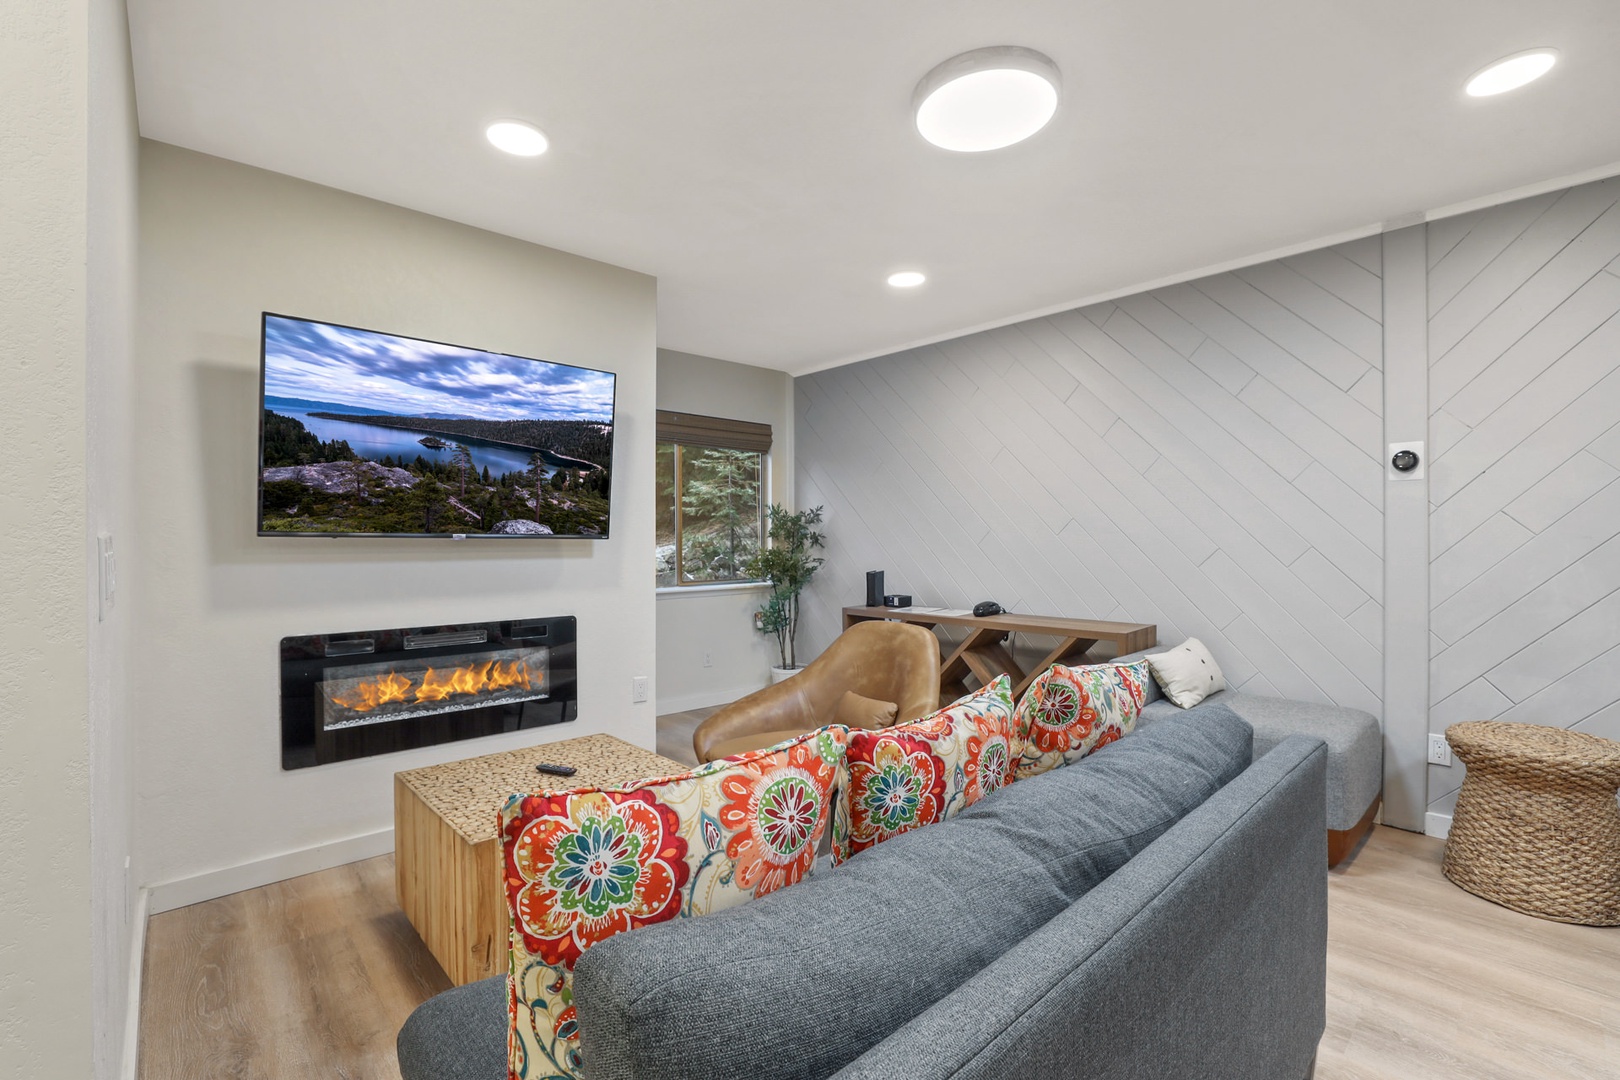 Game room features SmartTV and fireplace